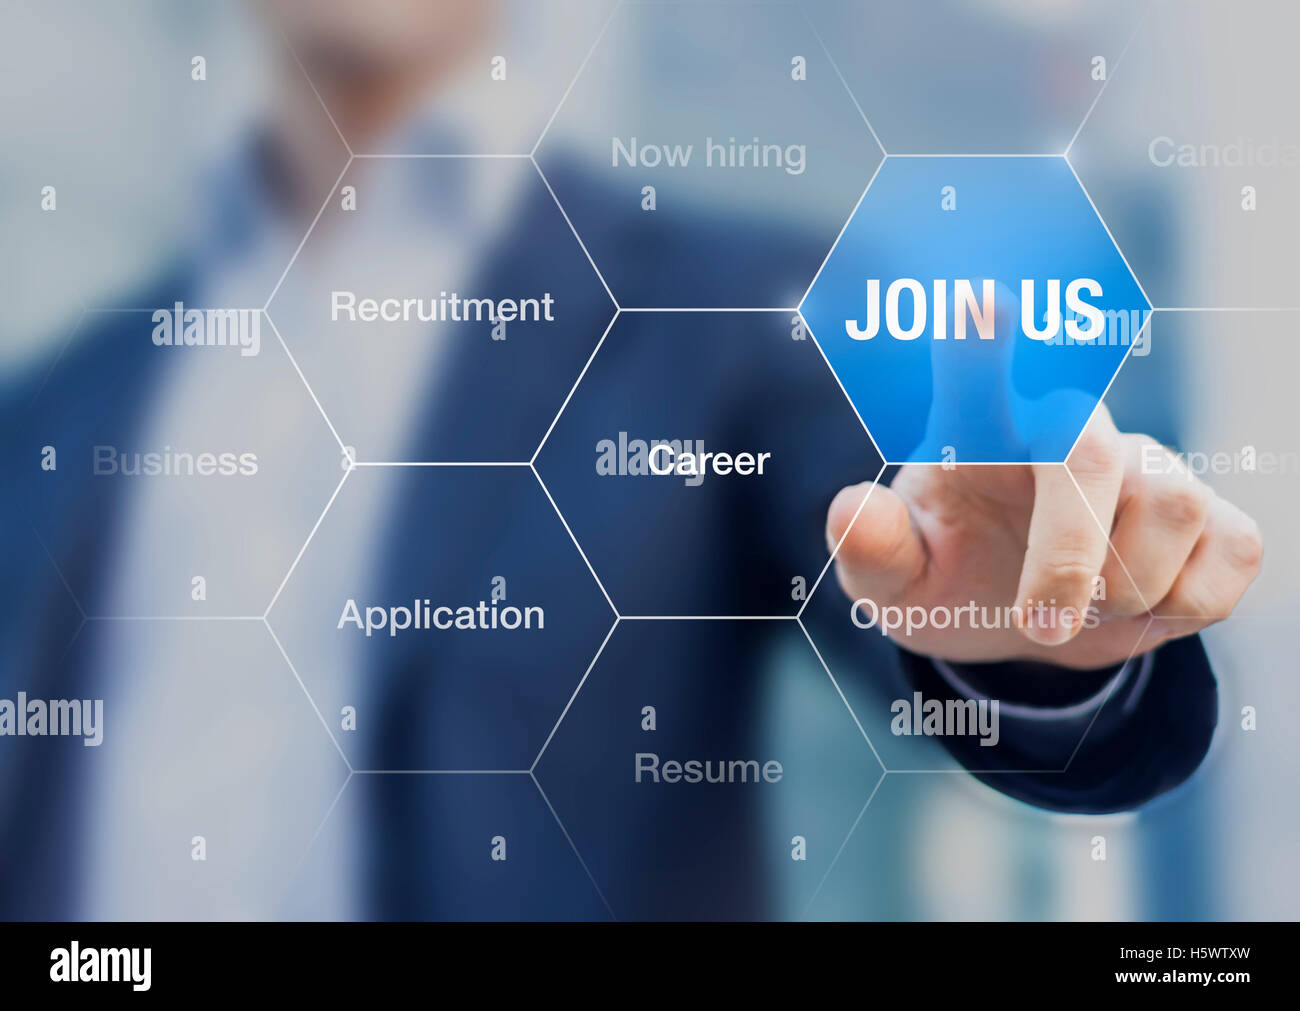 Recruiter pointing Join Us sign on screen to advertise about hiring opportunities Stock Photo